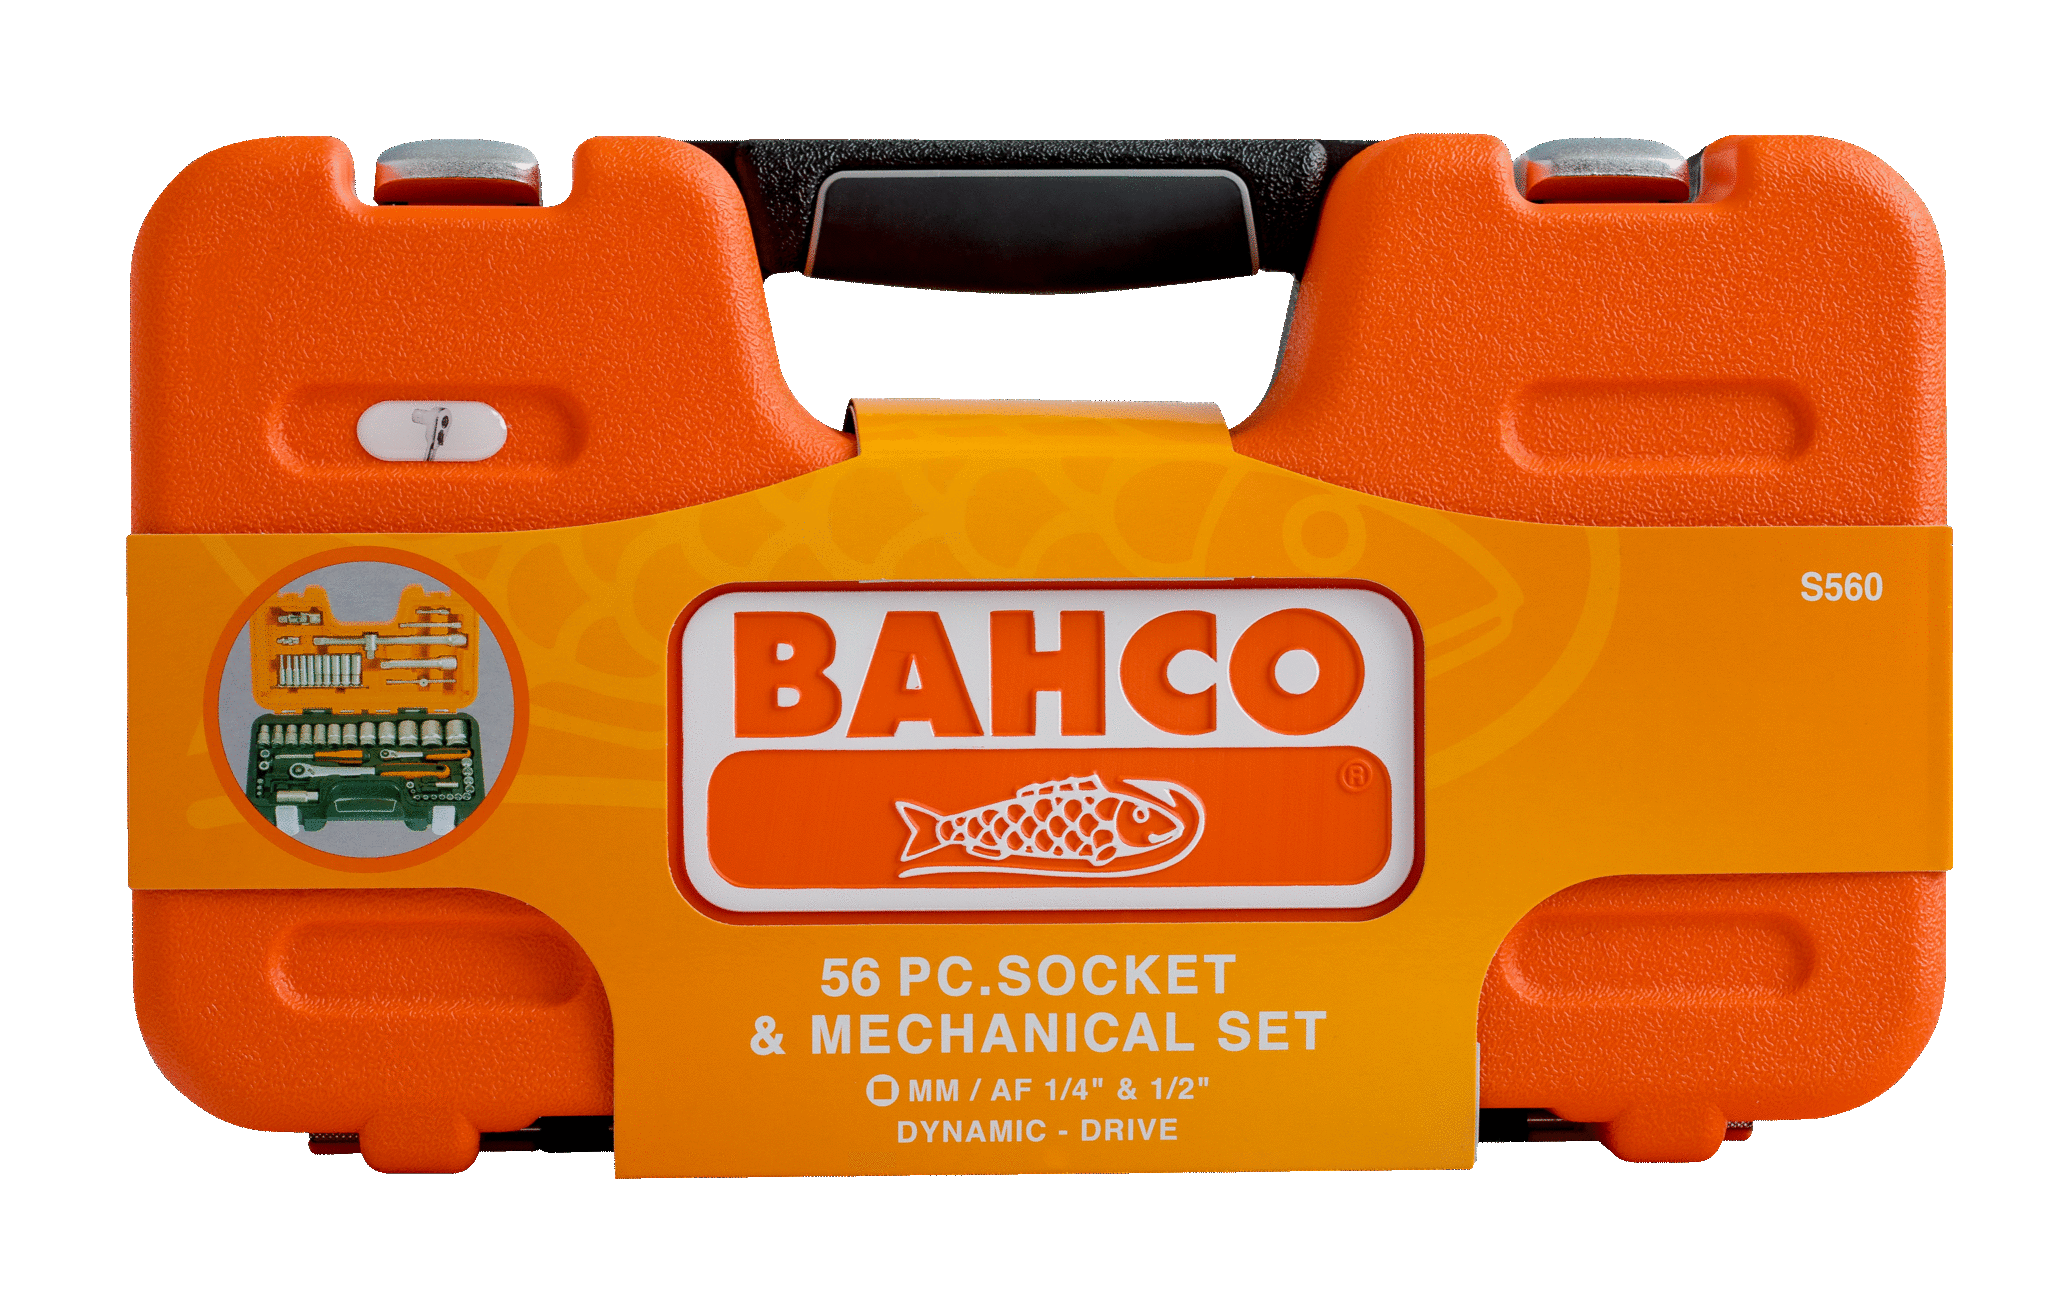 1/4" and 1/2" Square Drive Socket Set with Metric Bi-Hex Profile and Slim Head Ratchet - S560 by Bahco